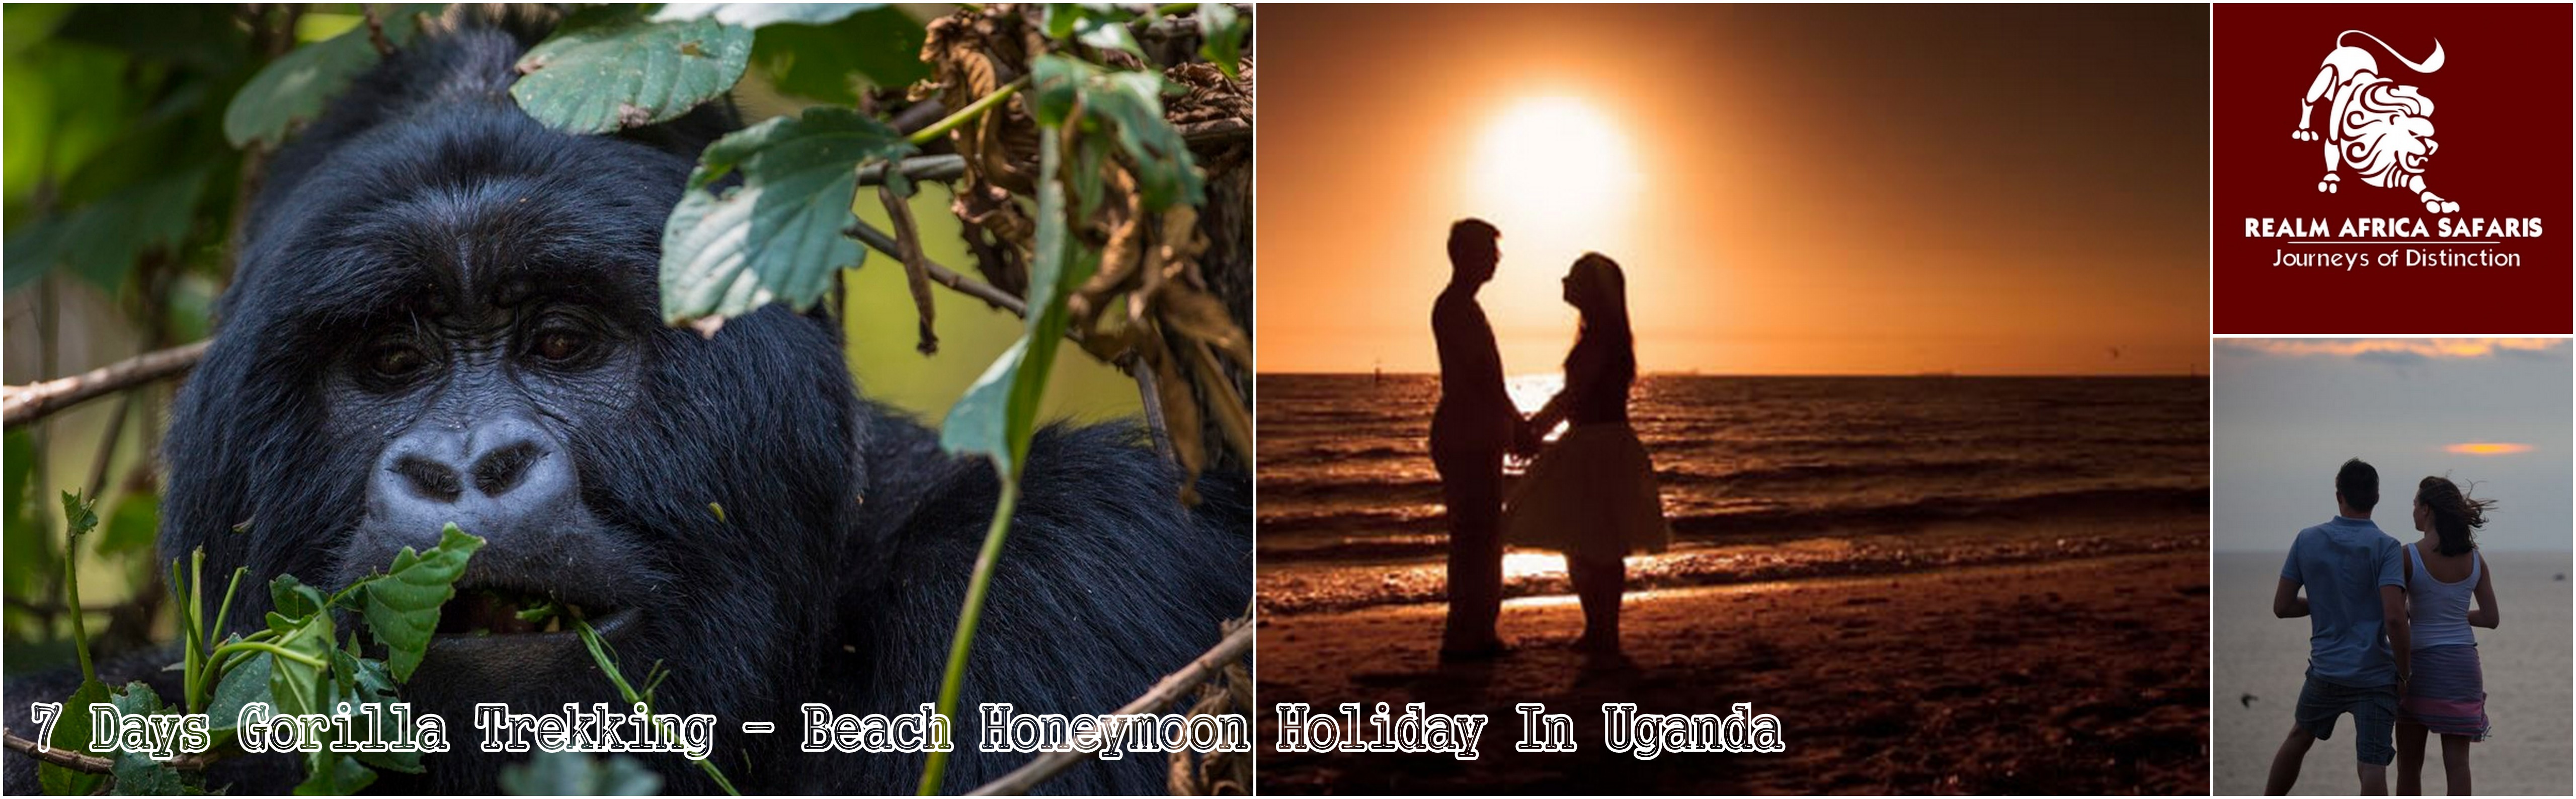 Gorillas and beach holiday